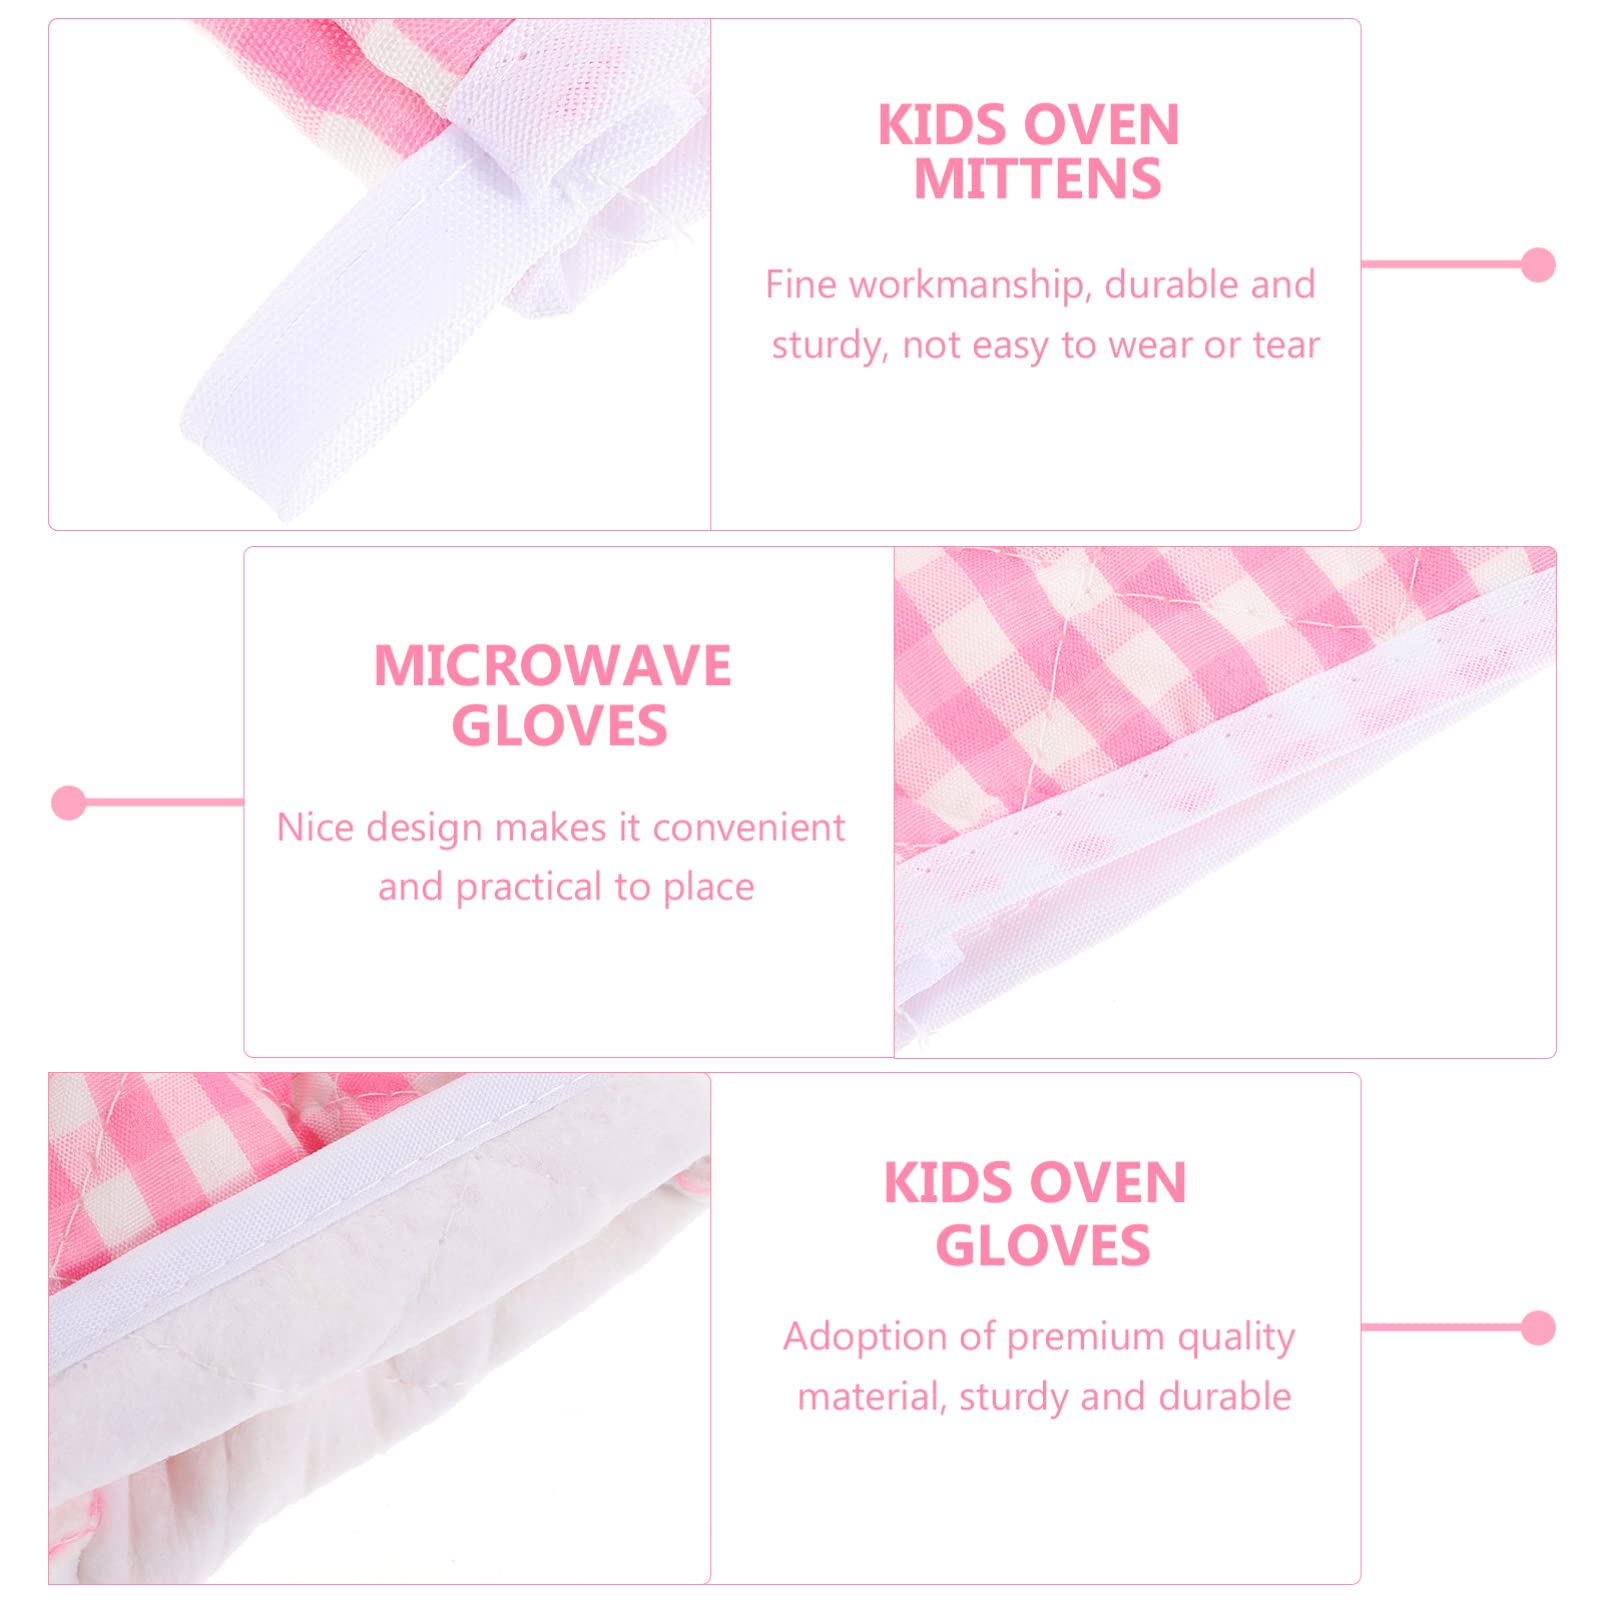 2pcs Kids Oven Mitts for Children Play Kitchen Heat Resistant Kitchen Mitts Kitchen Gloves for Cooking Baking Kids Oven Gloves Griddle Accessories